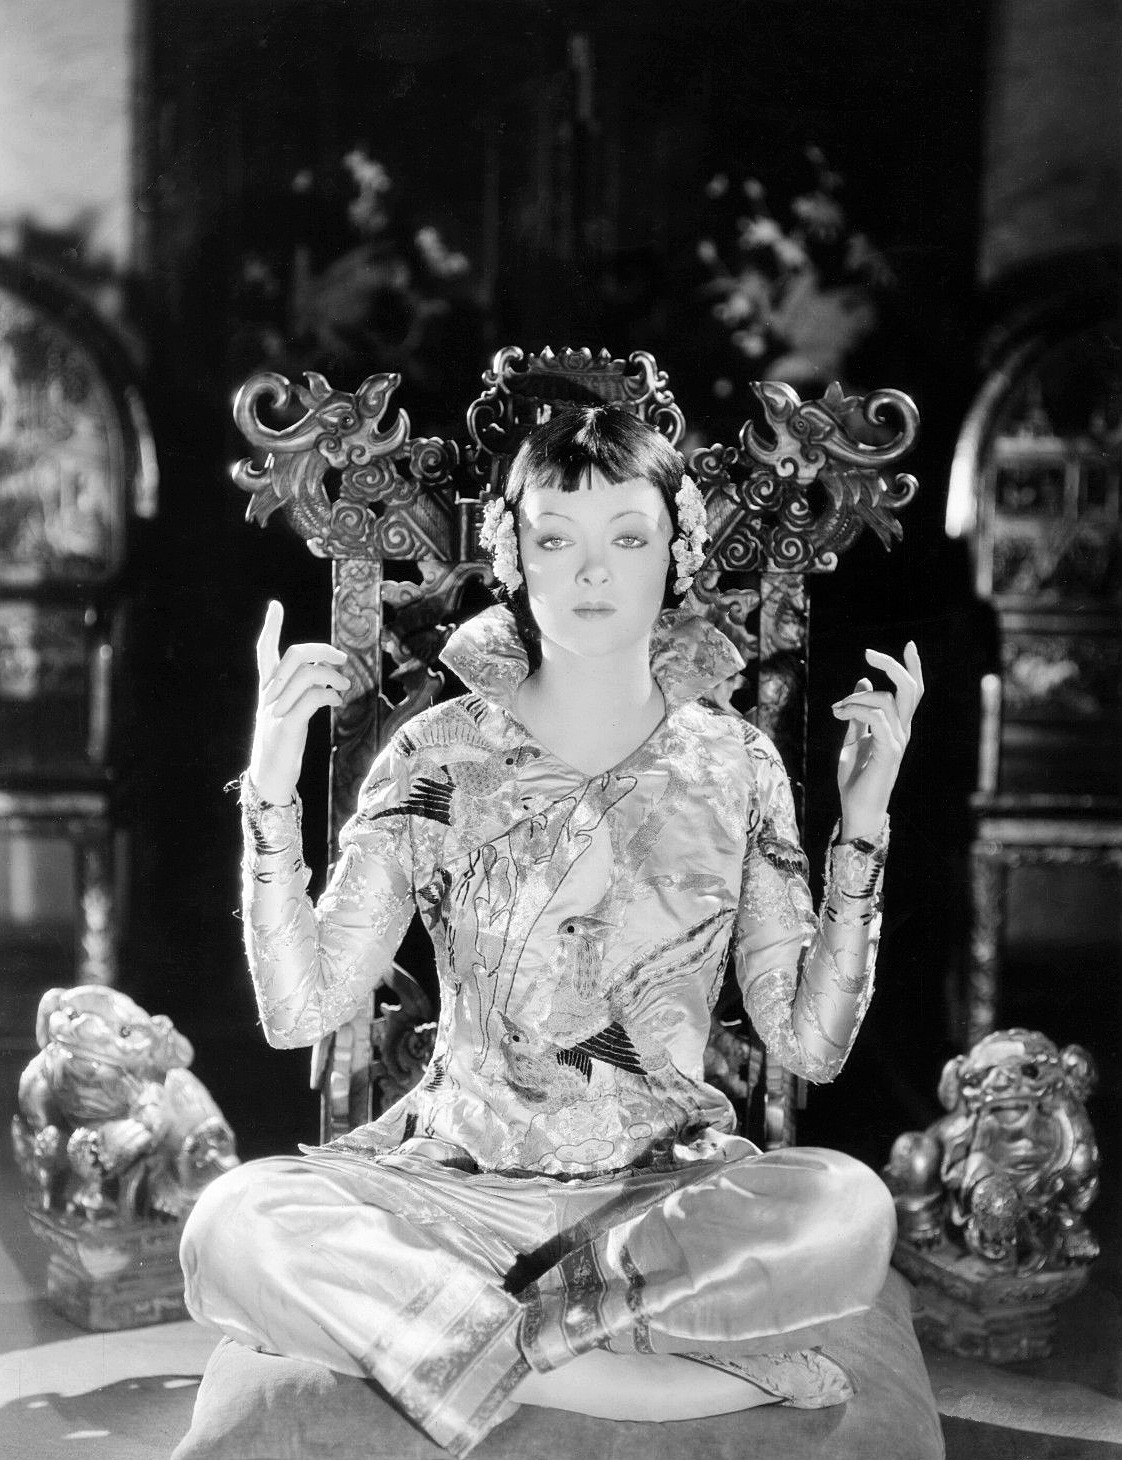 wehadfacesthen:
“Myrna Loy in The Mask of Fu Manchu  (Charles Brabin, 1932) wearing a costume designed by Adrian
”